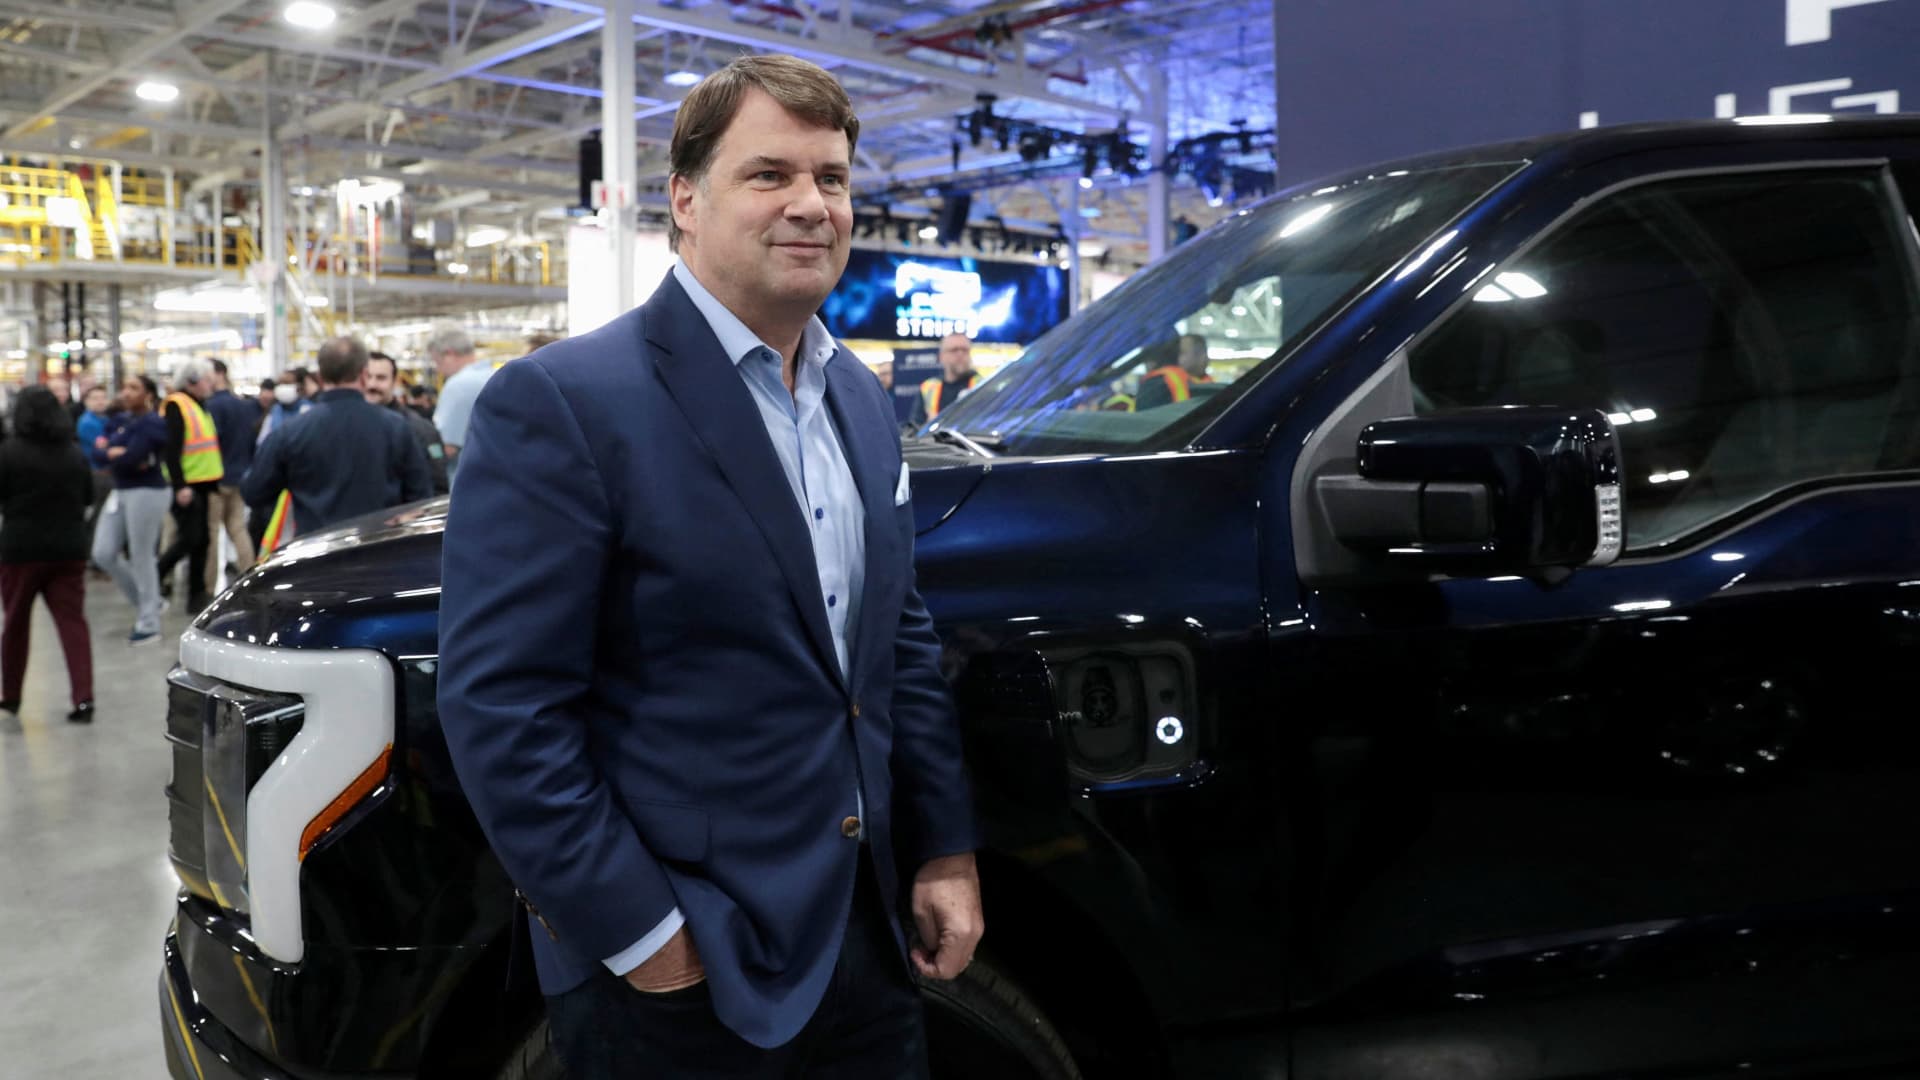 ford-ceo-expects-consolidation-among-automakers-and-suppliers-as-ev-transition-fuels-costs